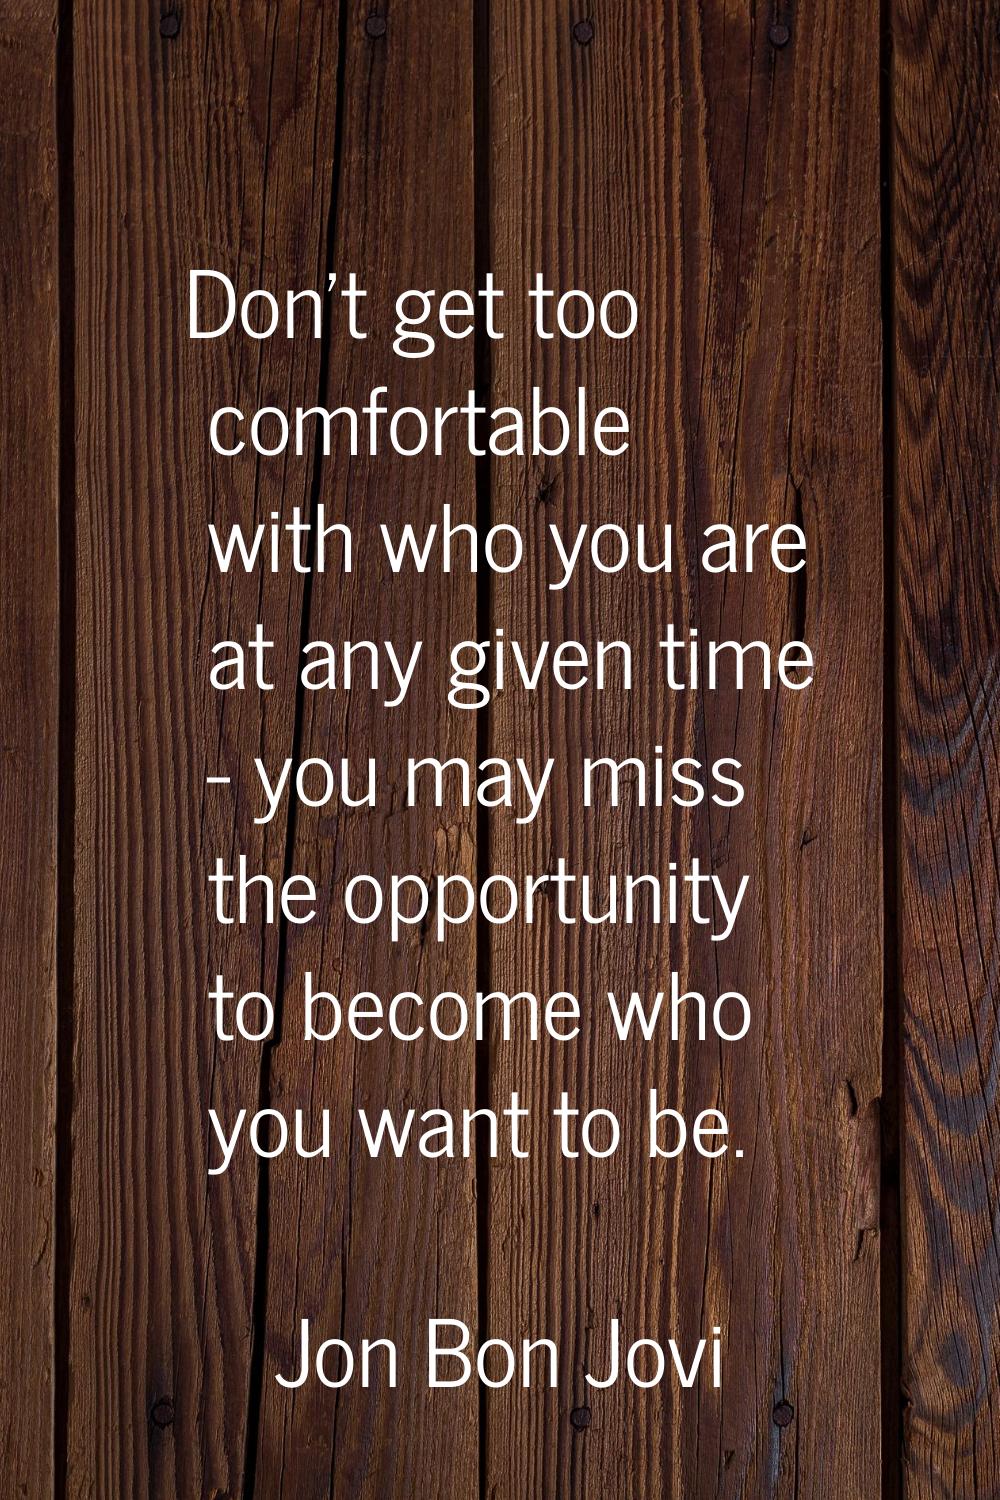 Don't get too comfortable with who you are at any given time - you may miss the opportunity to beco